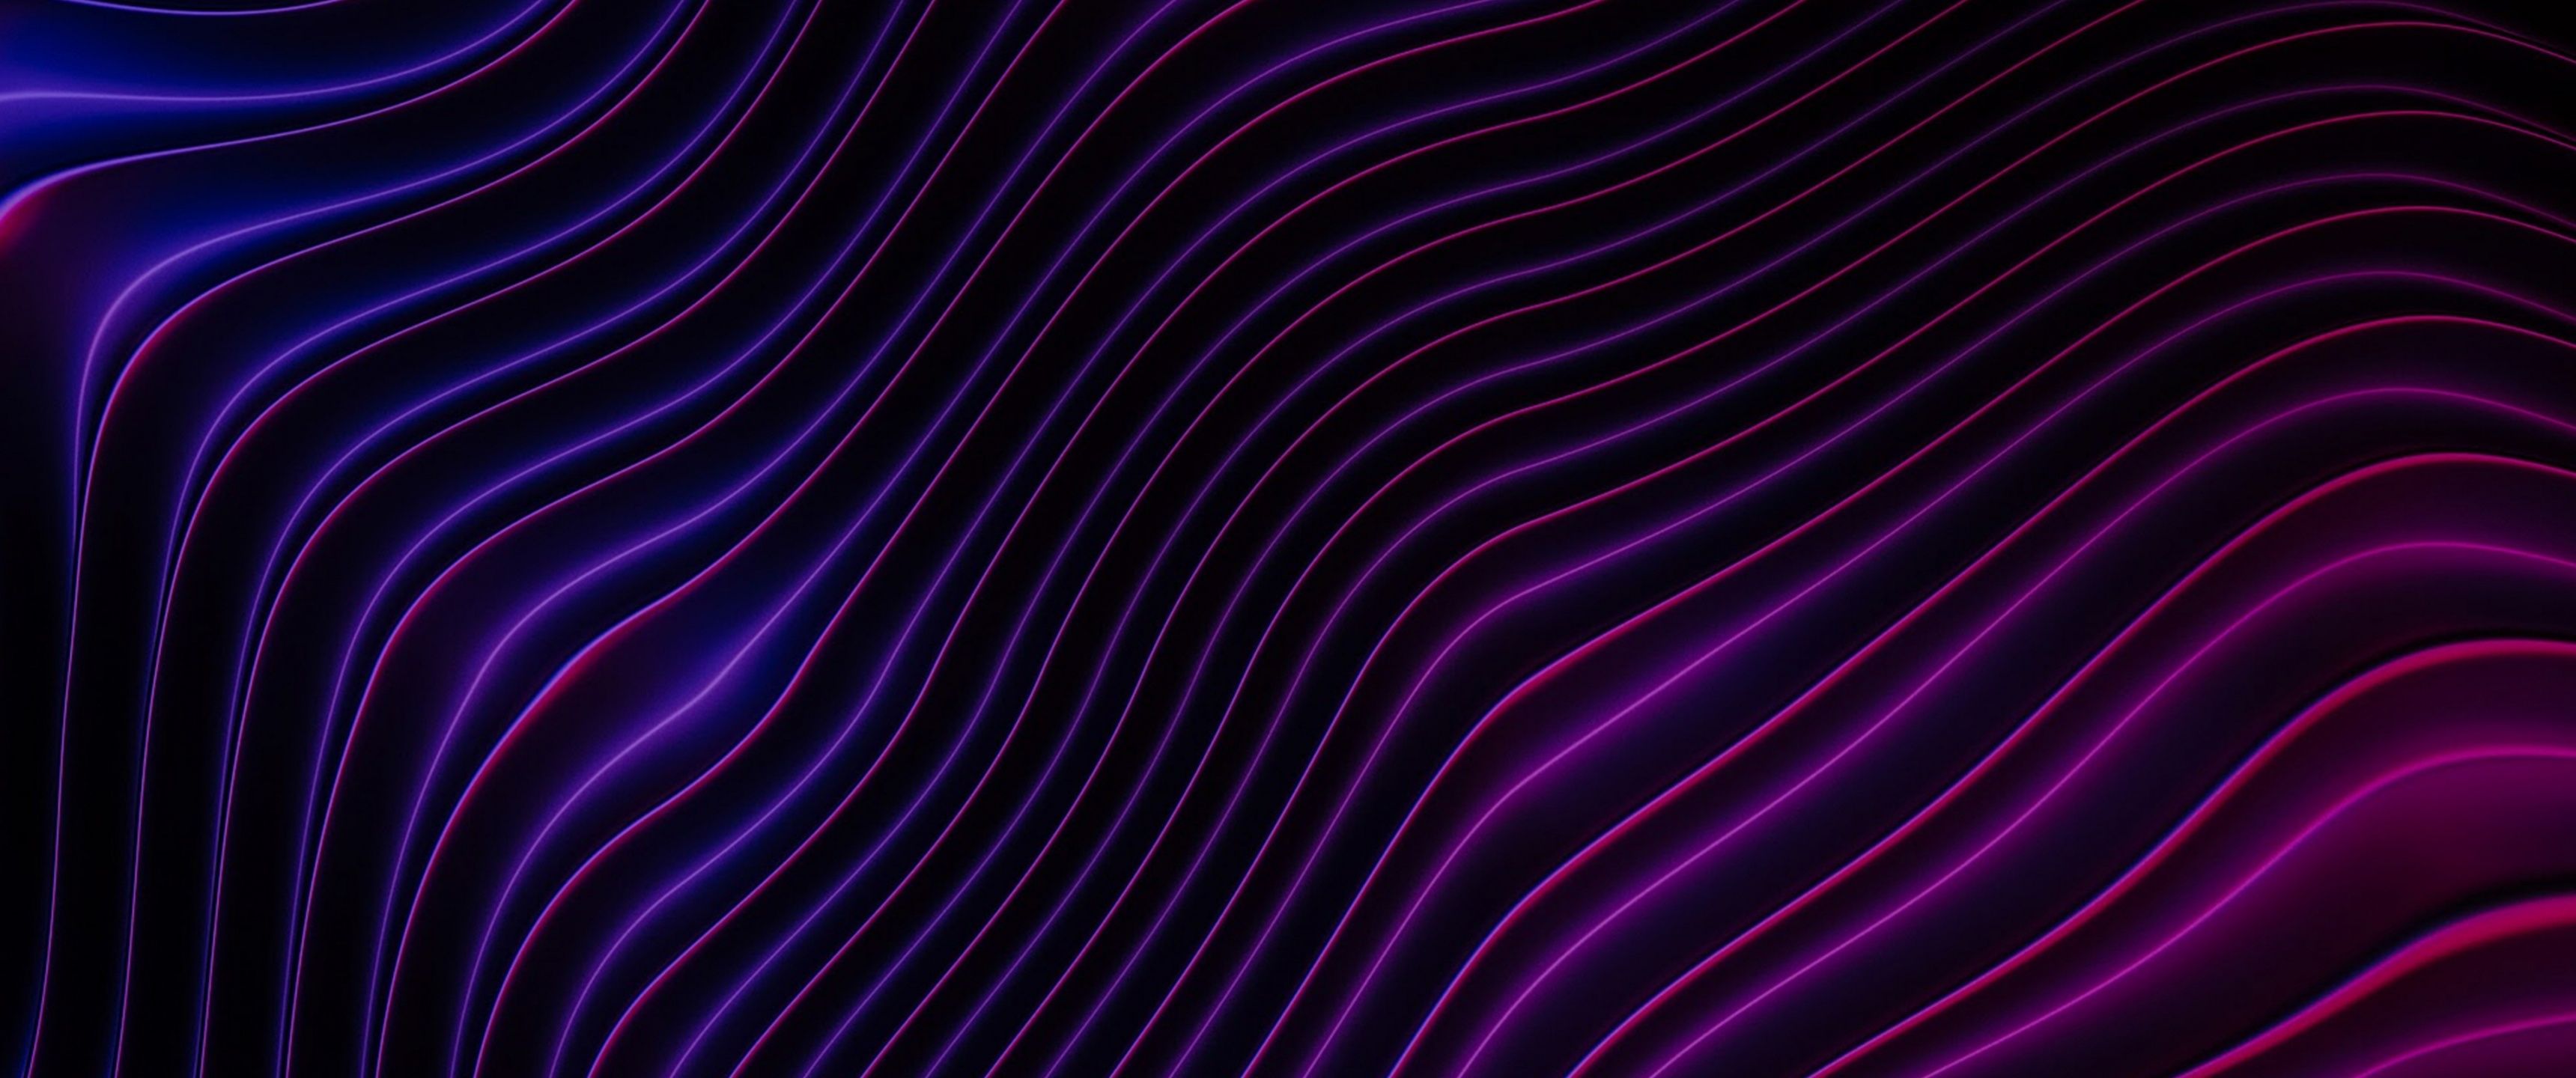 A purple and blue abstract image with wavy lines - 3440x1440